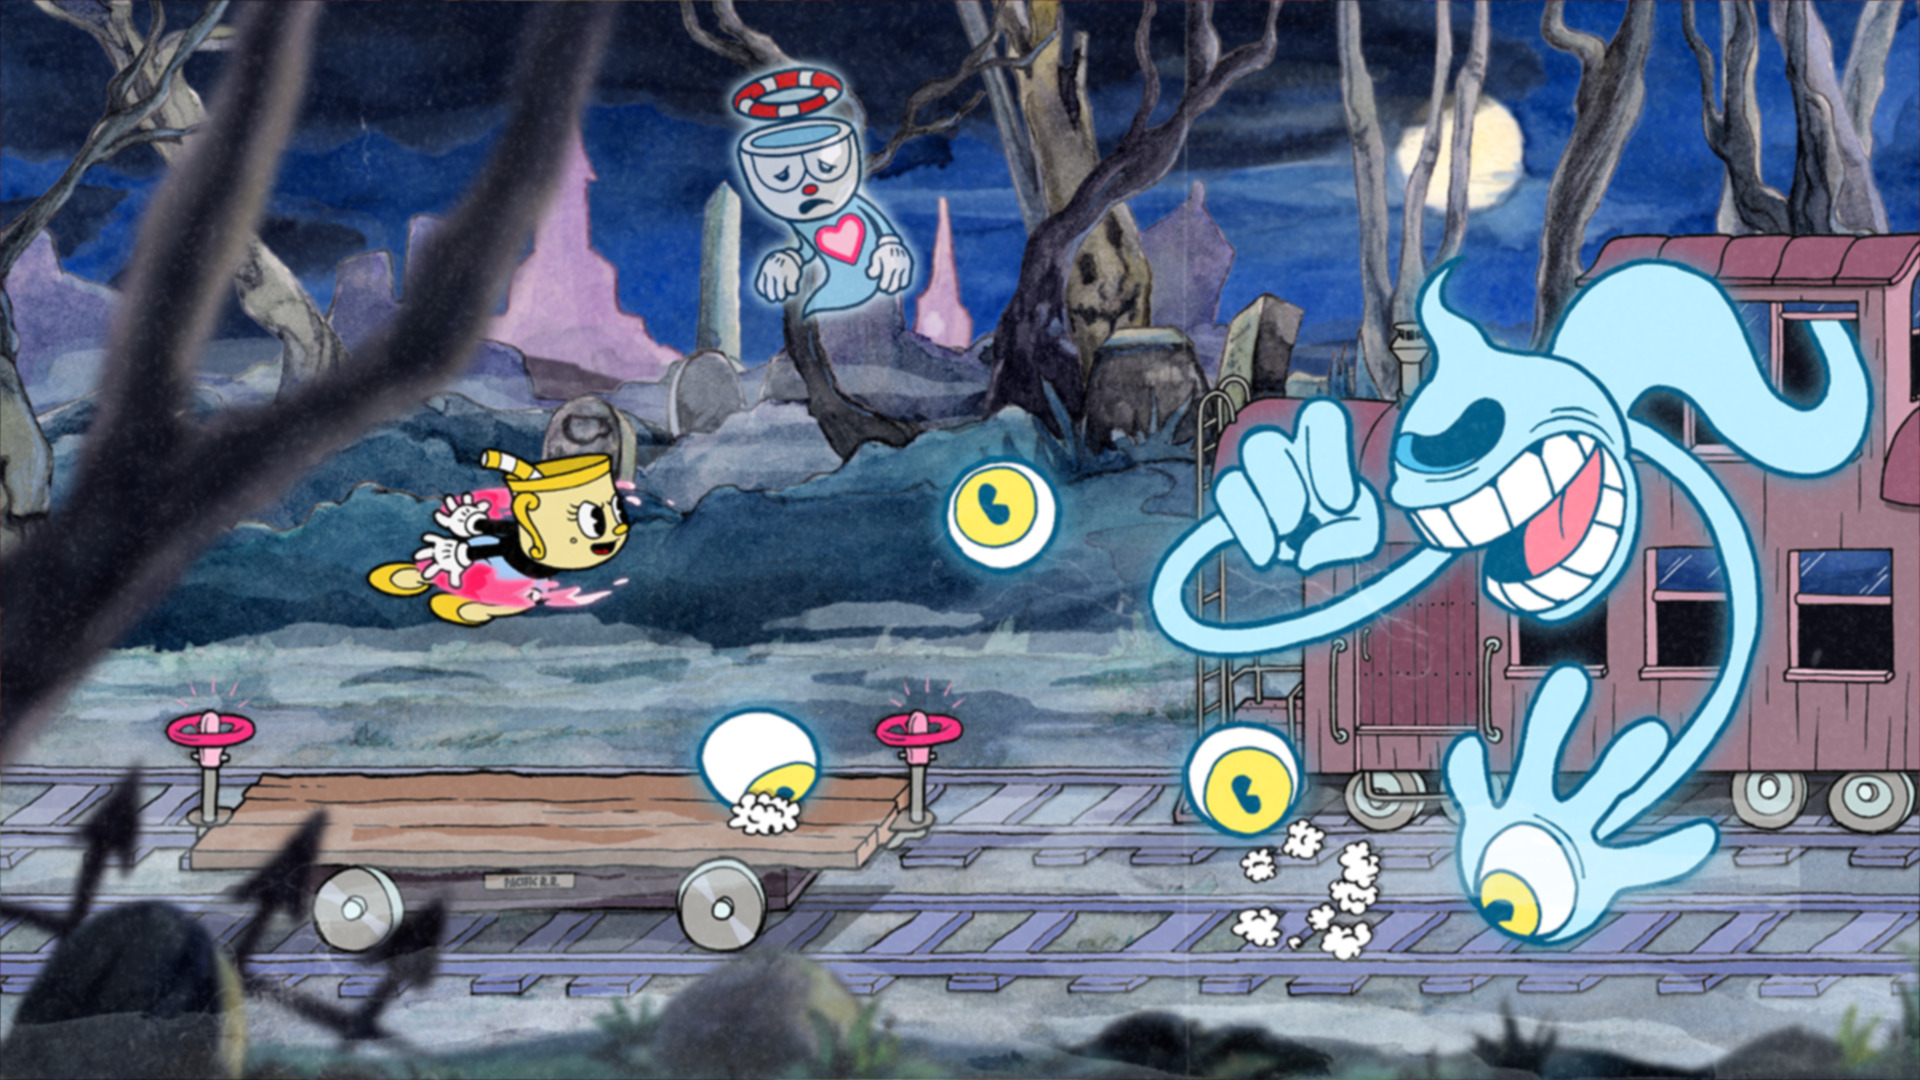 Cuphead DLC 'The Delicious Last Course' first gameplay - Gematsu